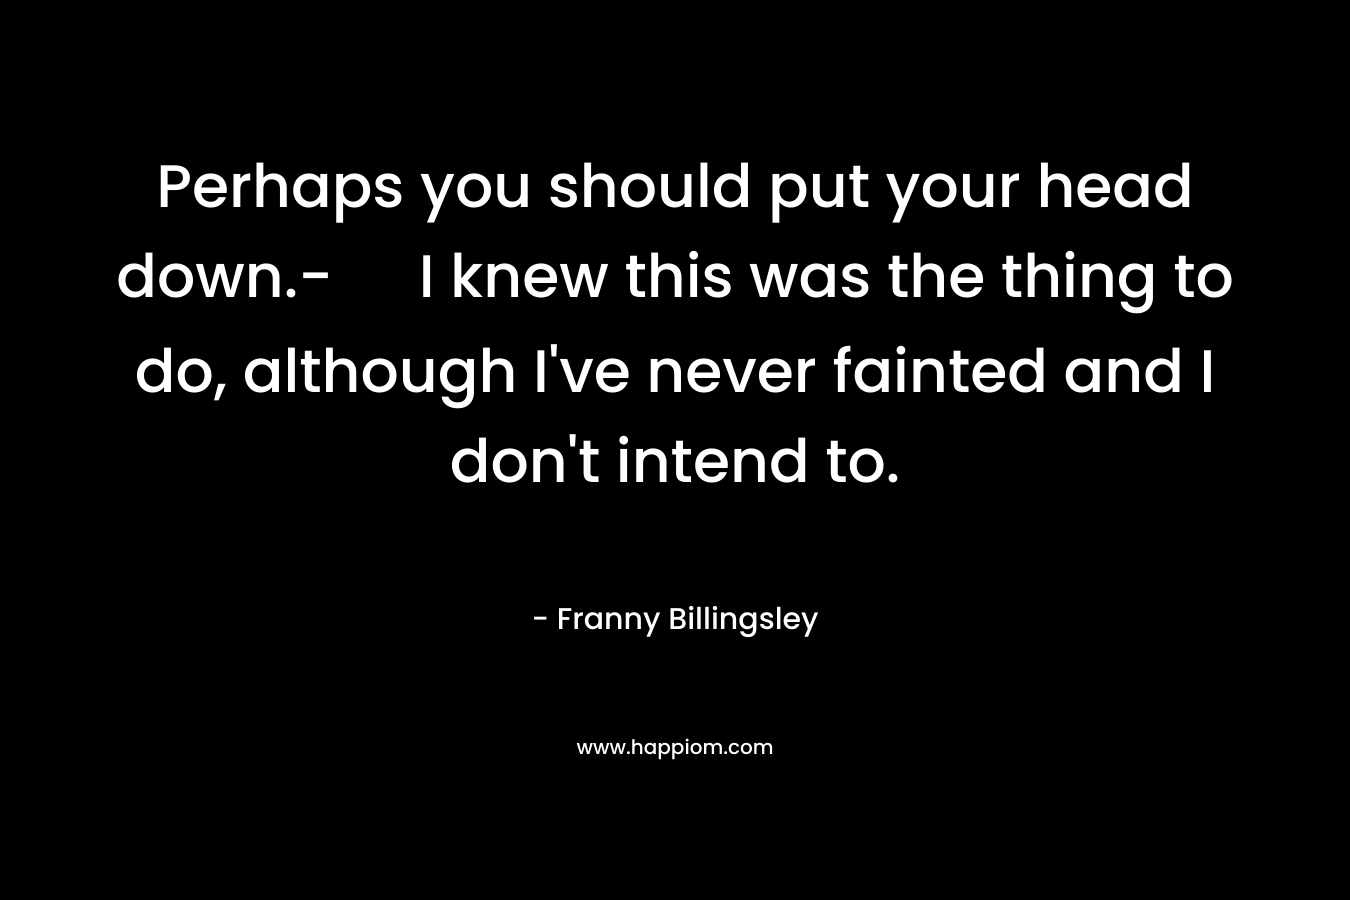 Perhaps you should put your head down.- I knew this was the thing to do, although I’ve never fainted and I don’t intend to. – Franny Billingsley